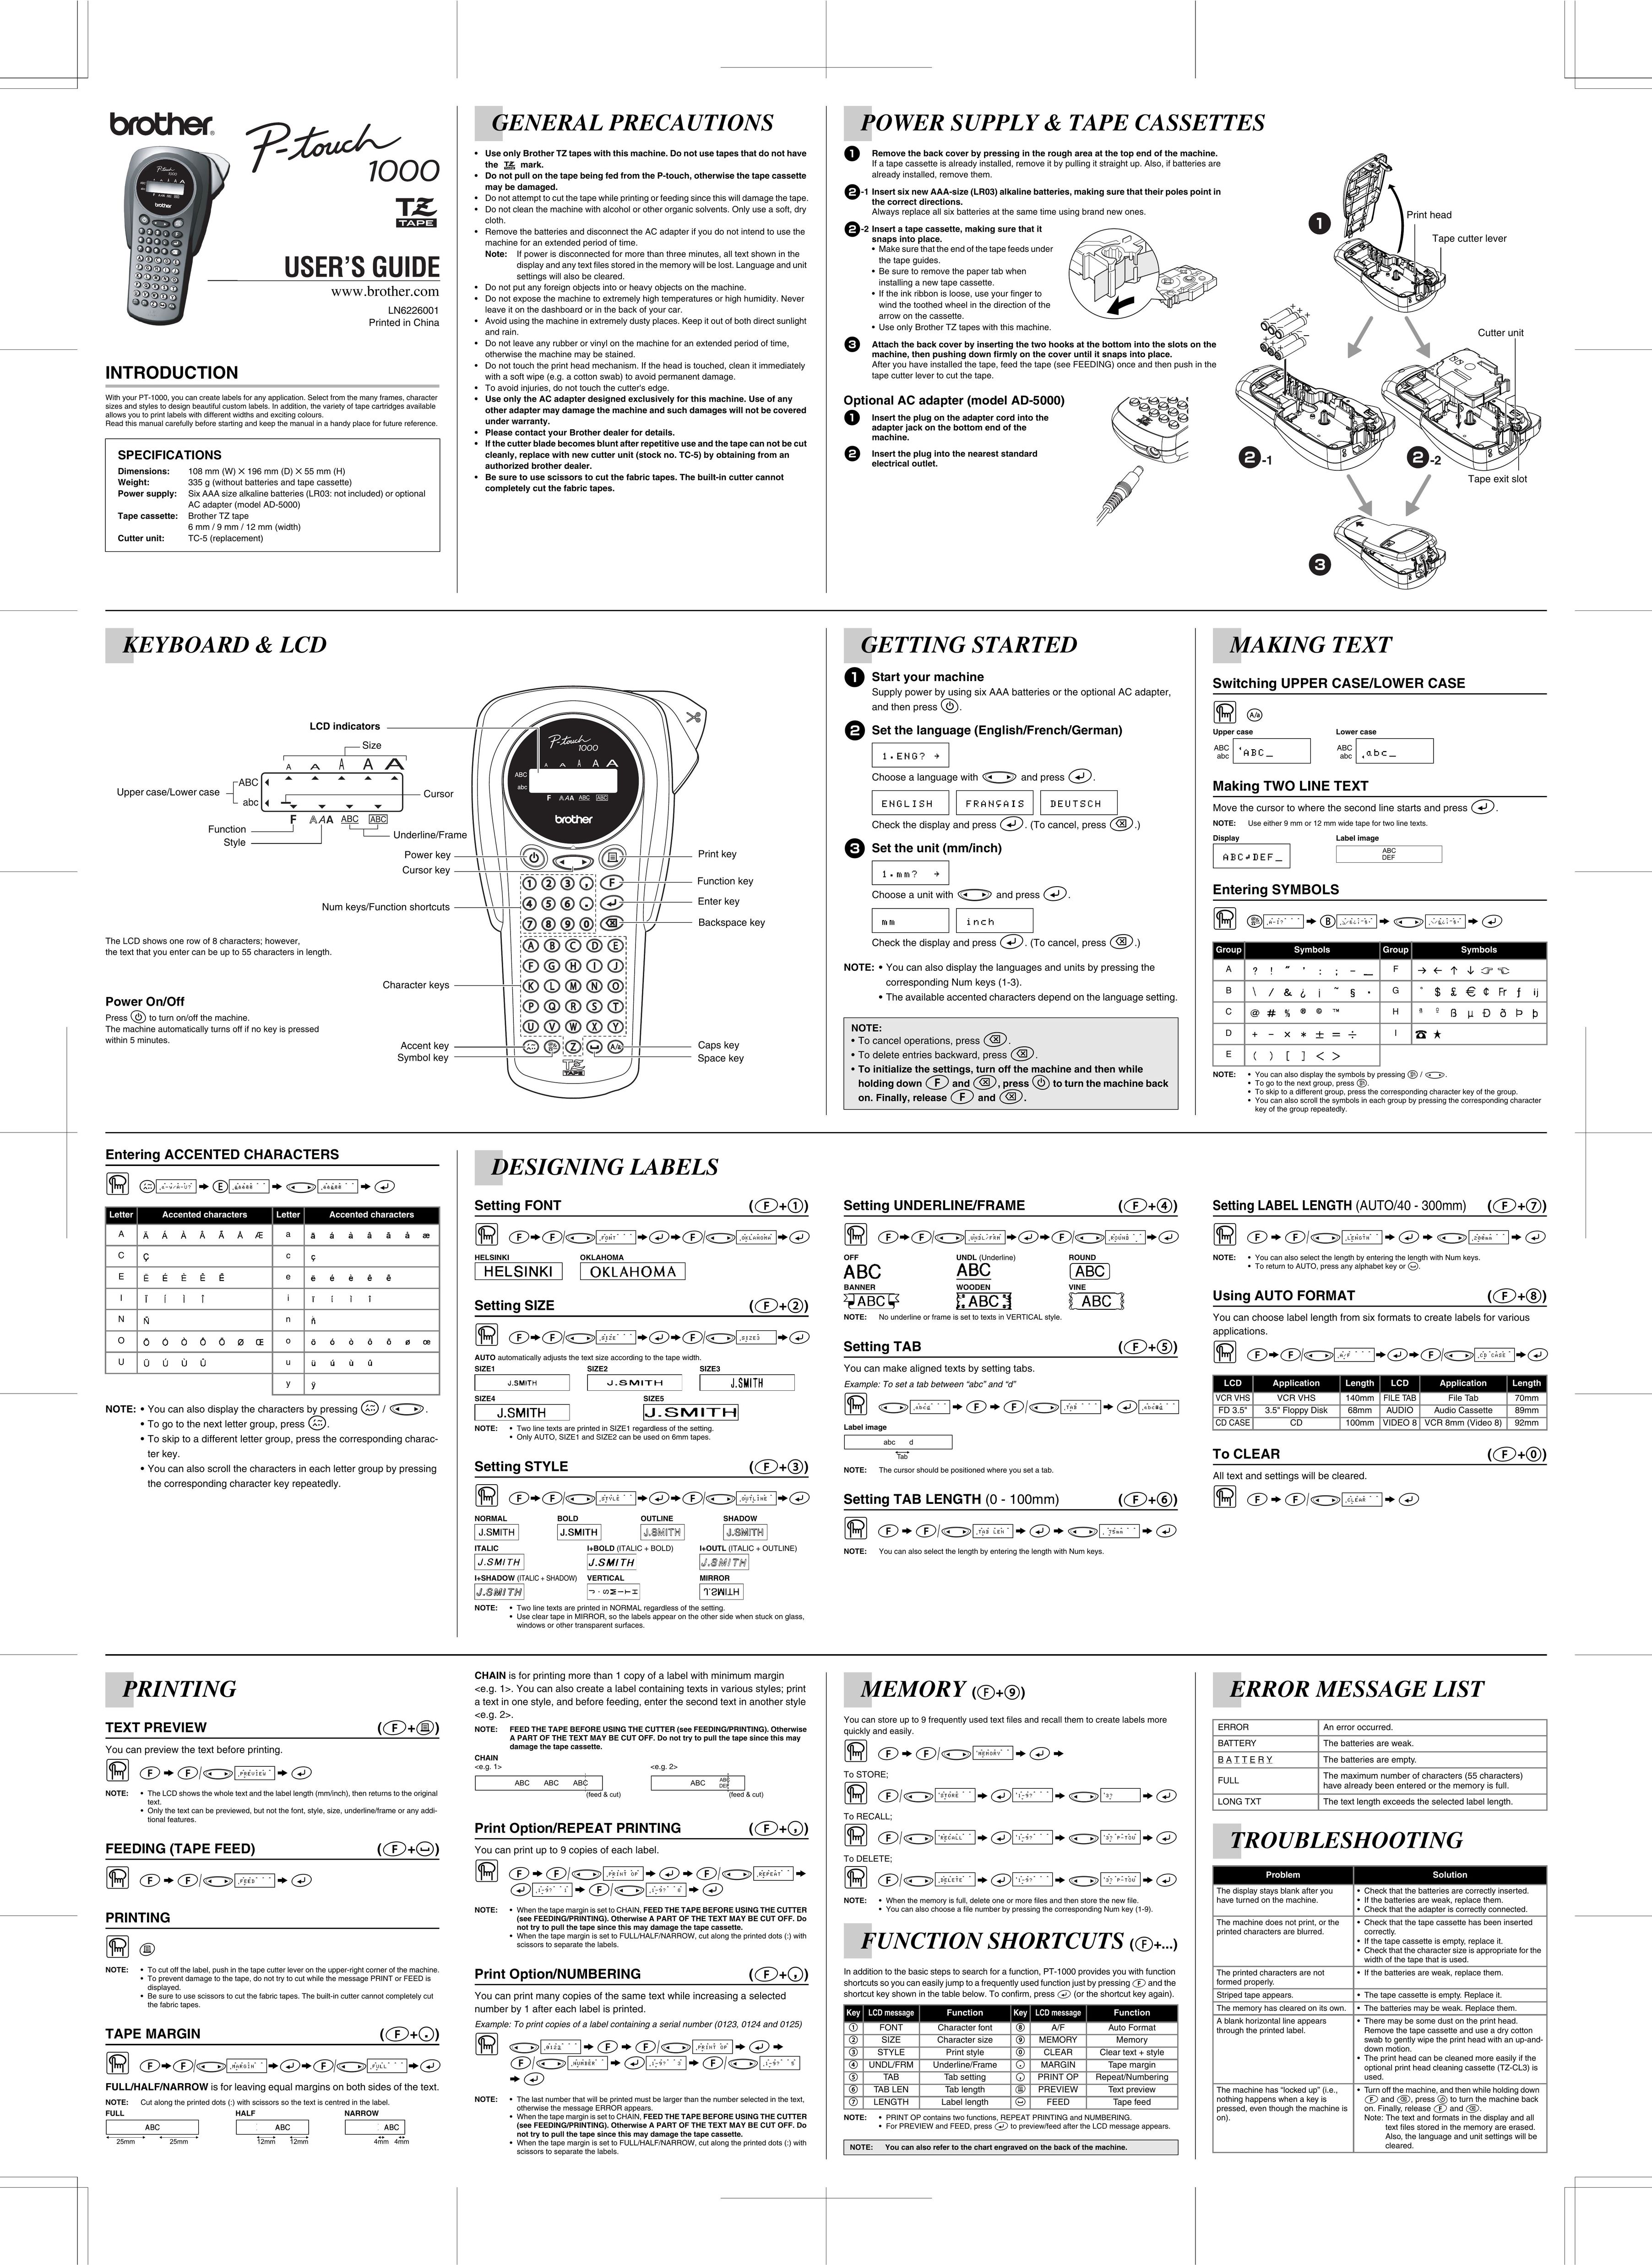 Brother 1000 All in One Printer User Manual